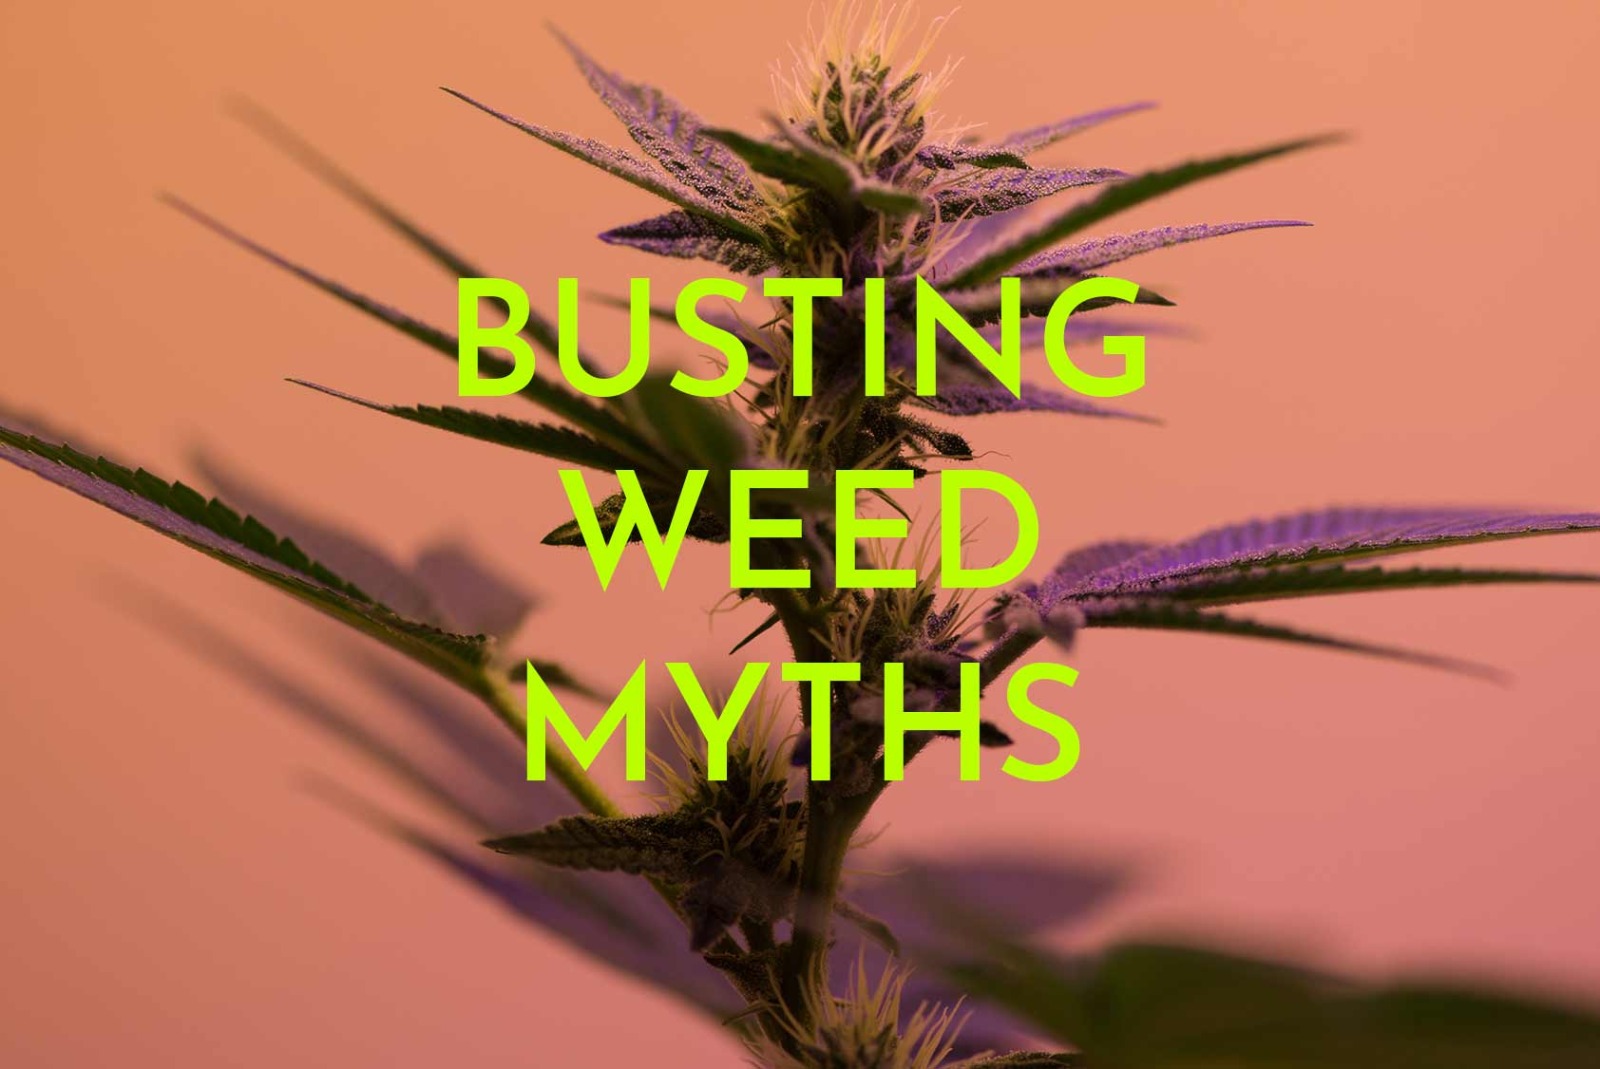 busting weed myths over a cannabis plant